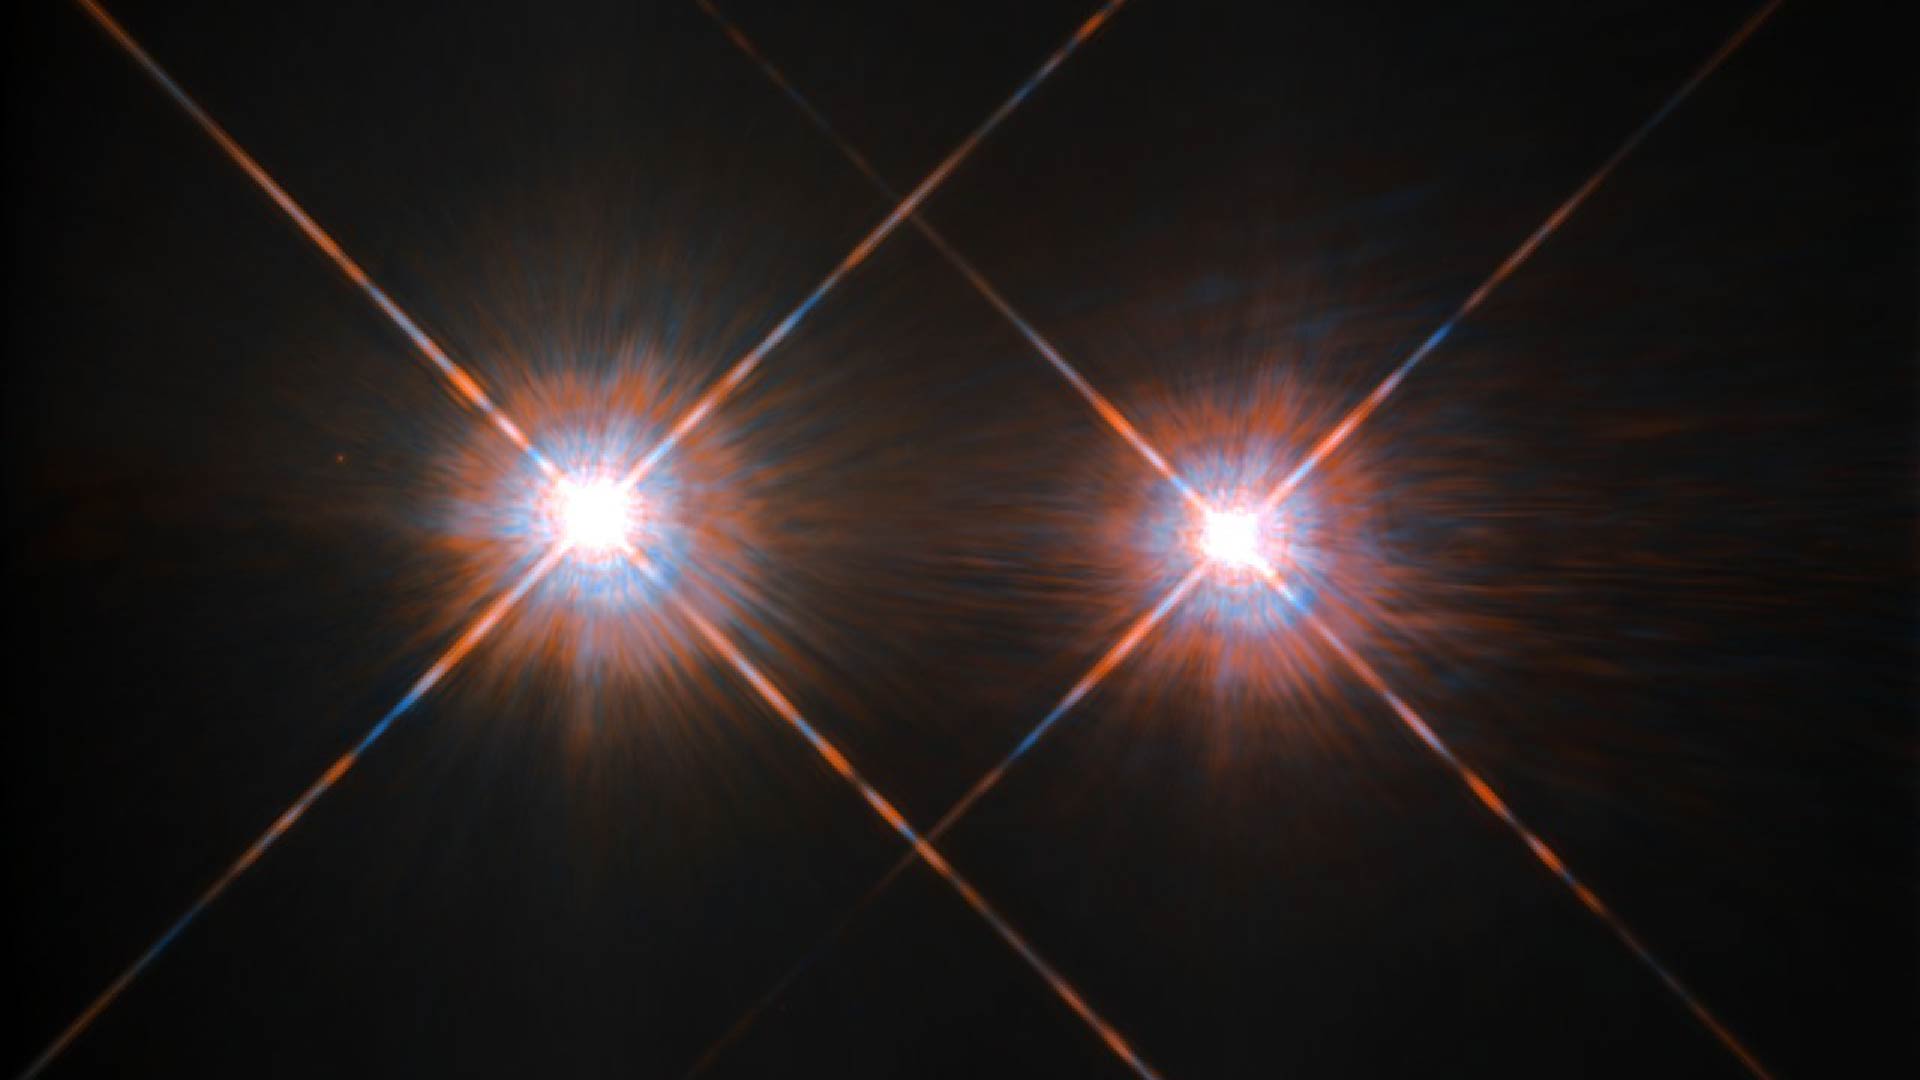 A view of the bright Alpha Centauri A (on the left) and Alpha Centauri B (on the right), shining like huge cosmic headlamps in the dark